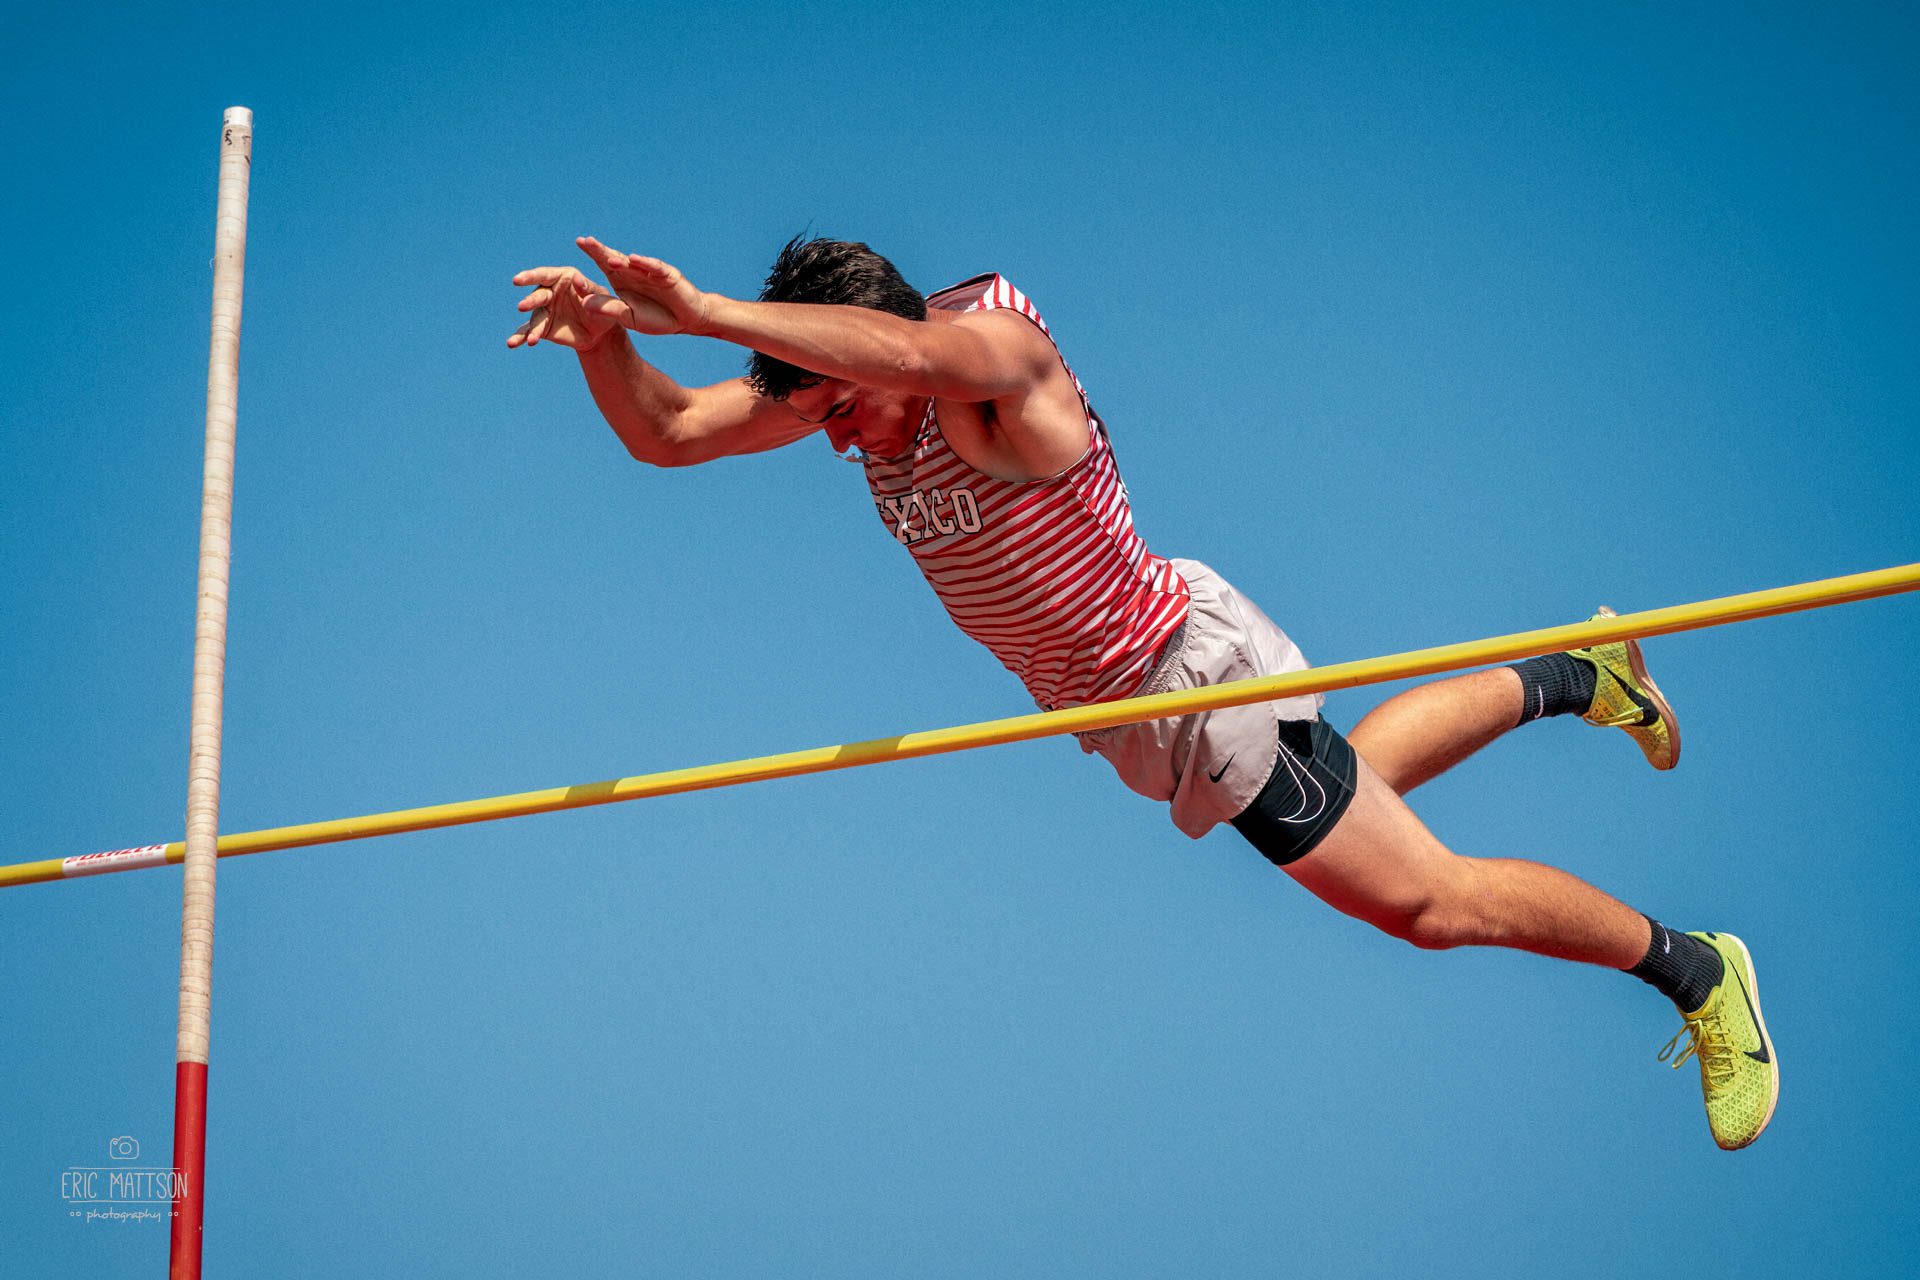 Morgan Grubb Completes Mexico High School Track Season At State Meet In Pole Vault